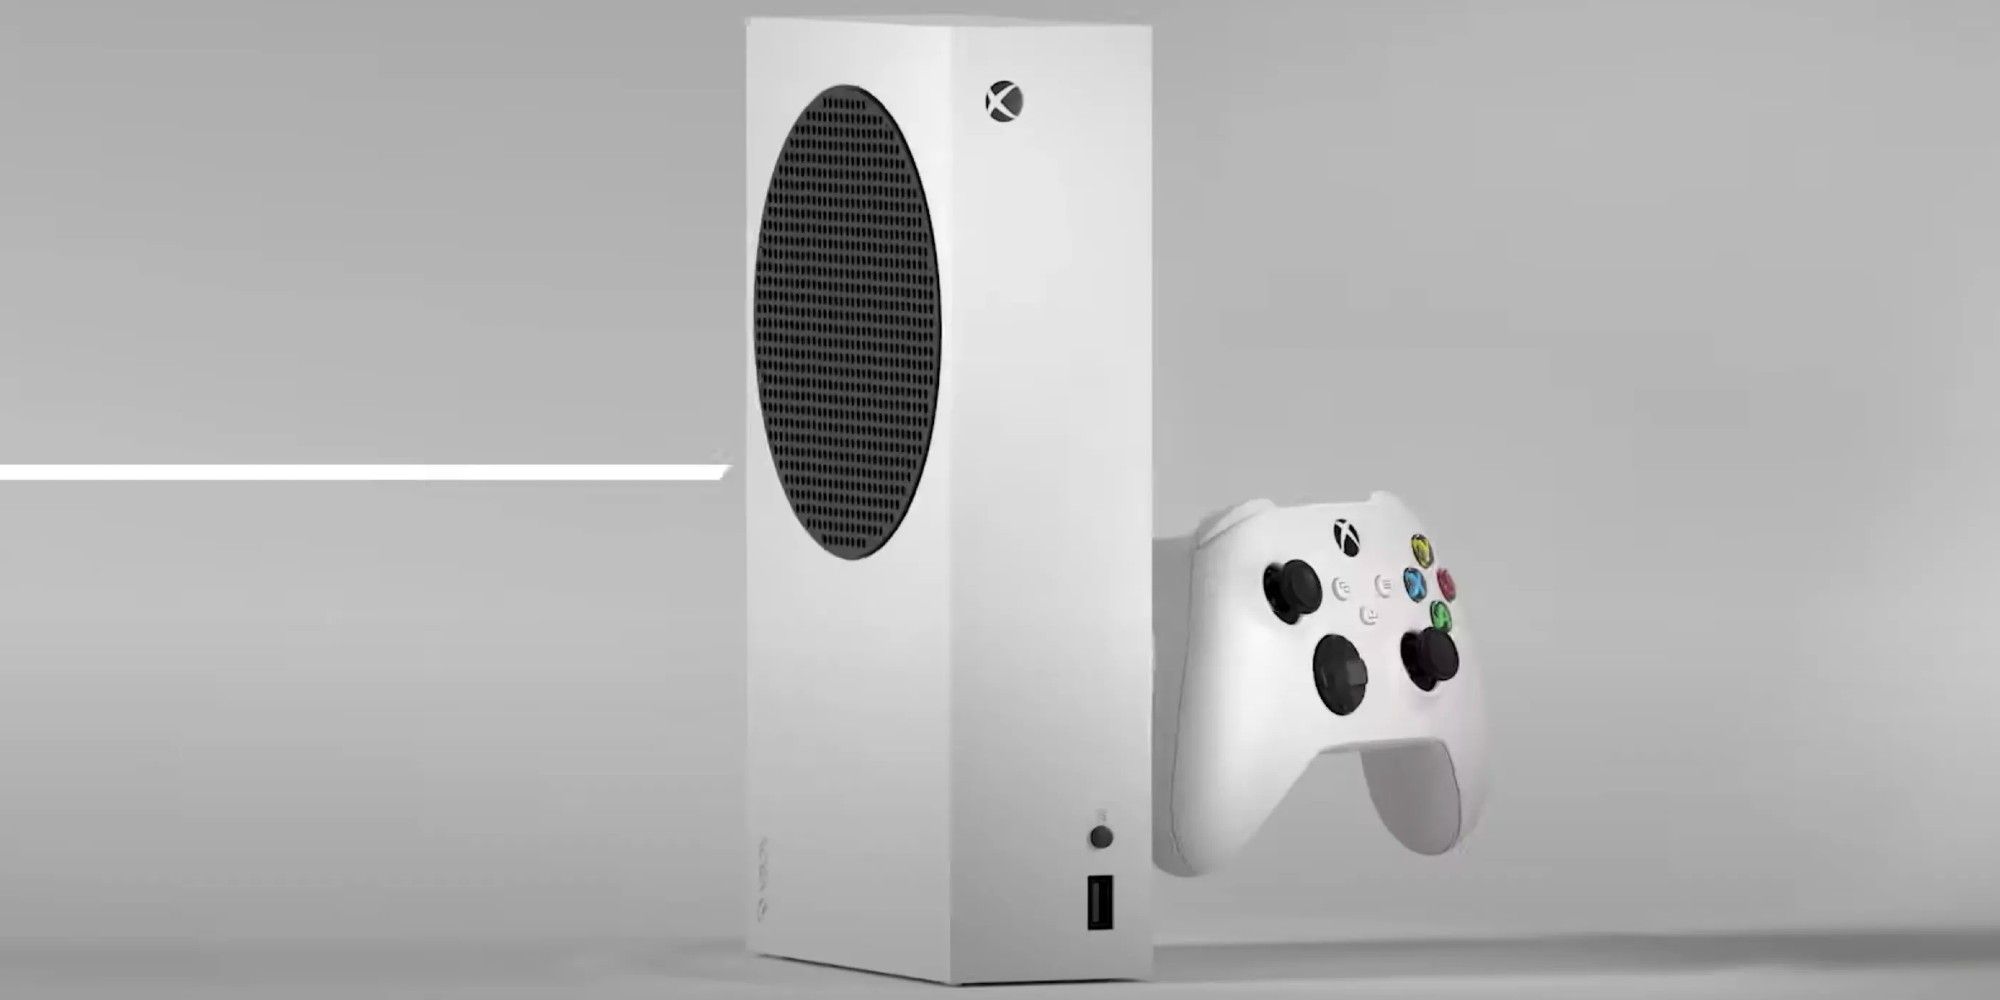 The Xbox Series X and controller.